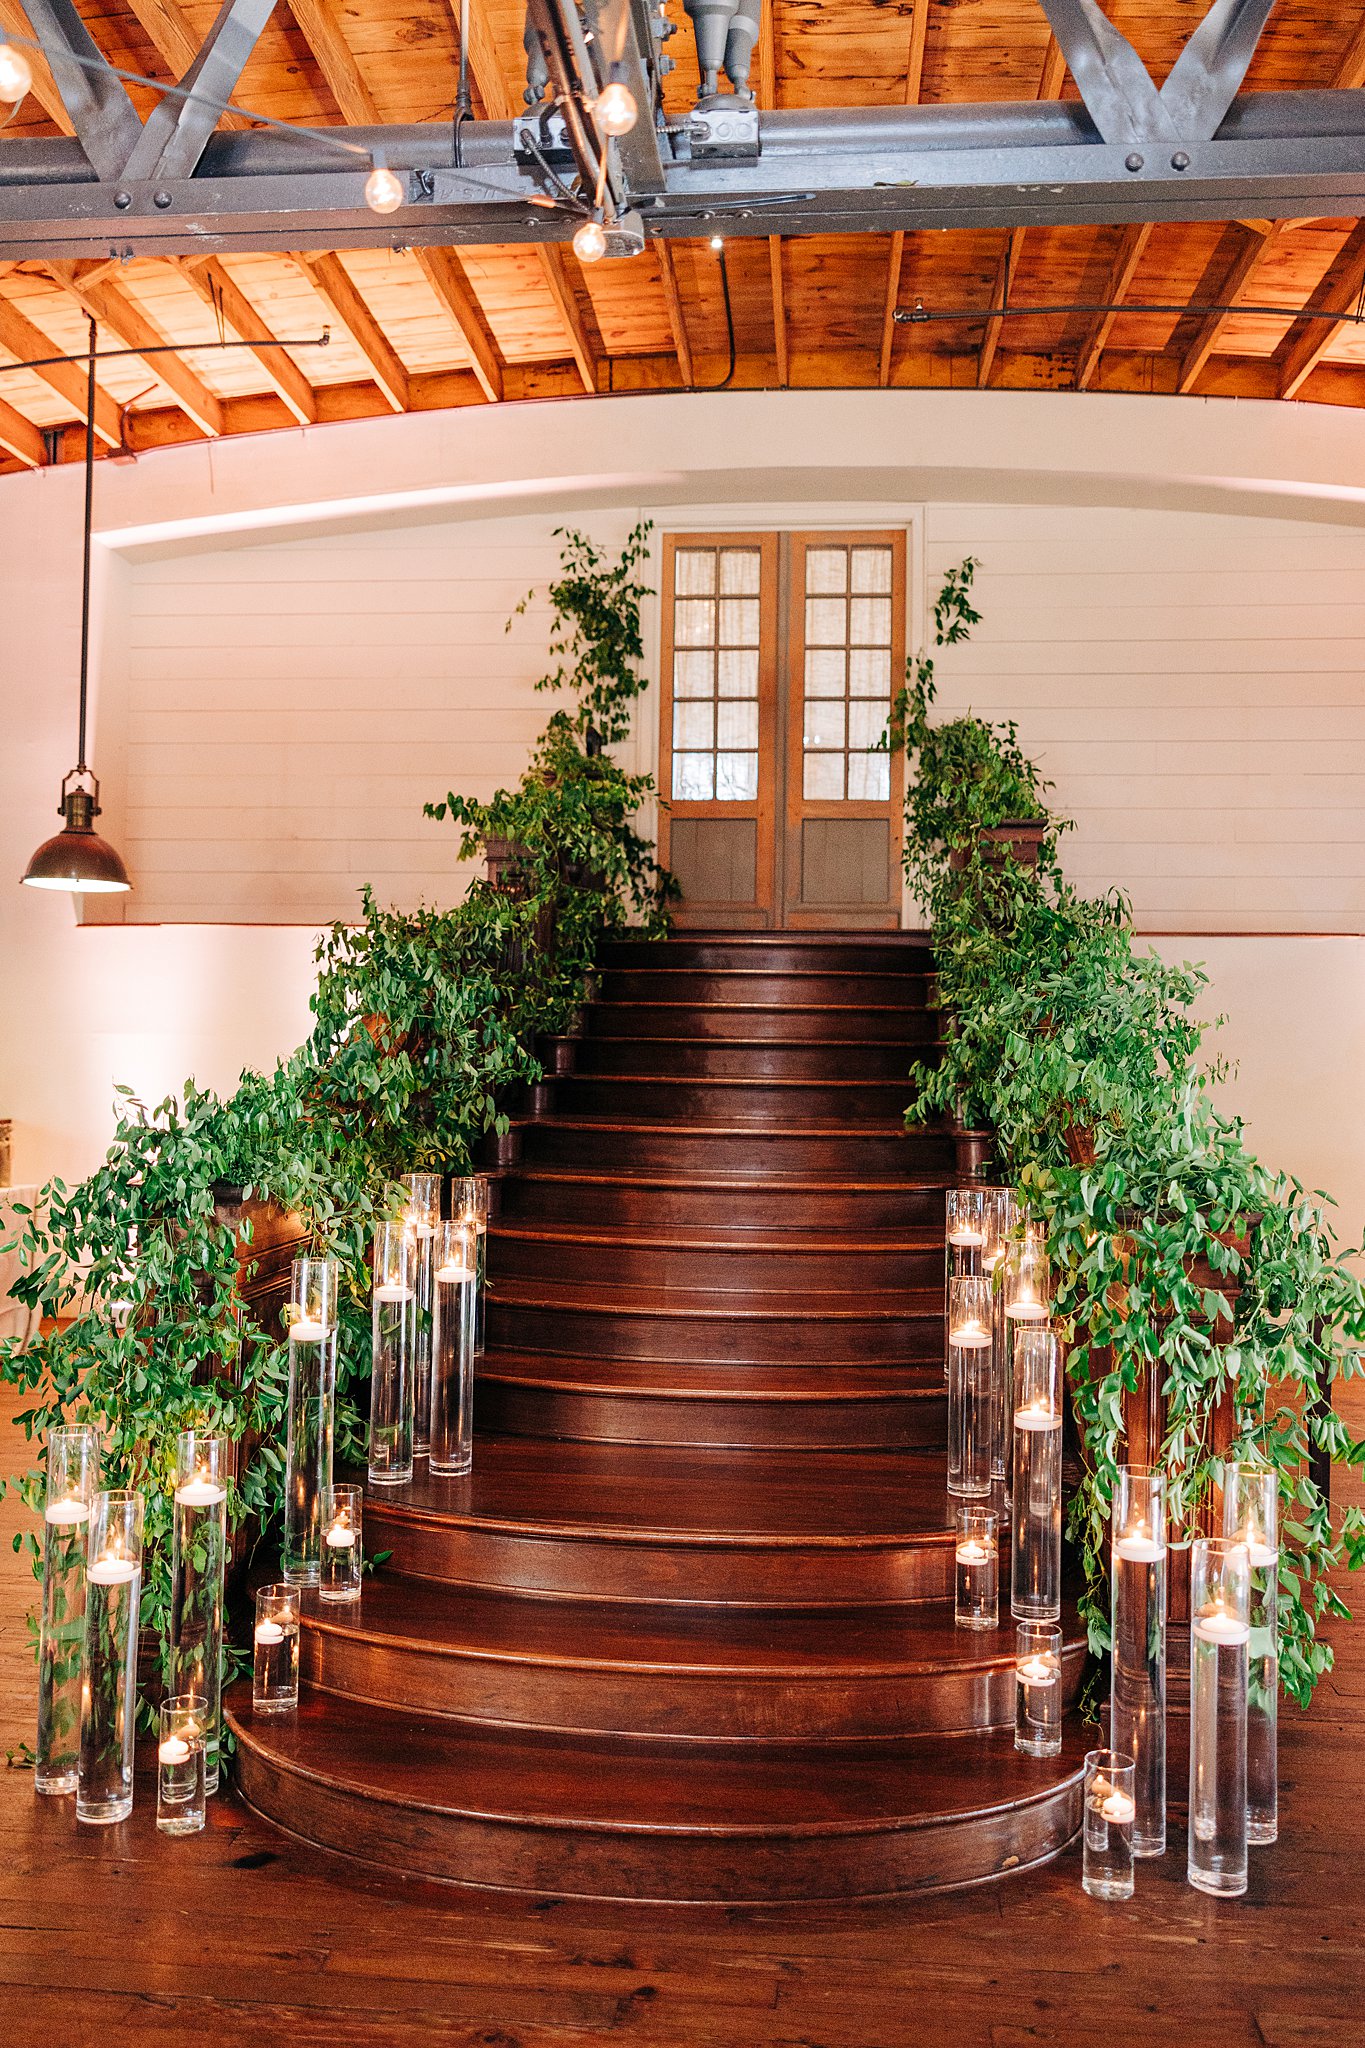 Details of the summerour studio wedding ceremony entrance staircase lines in greenery and candles